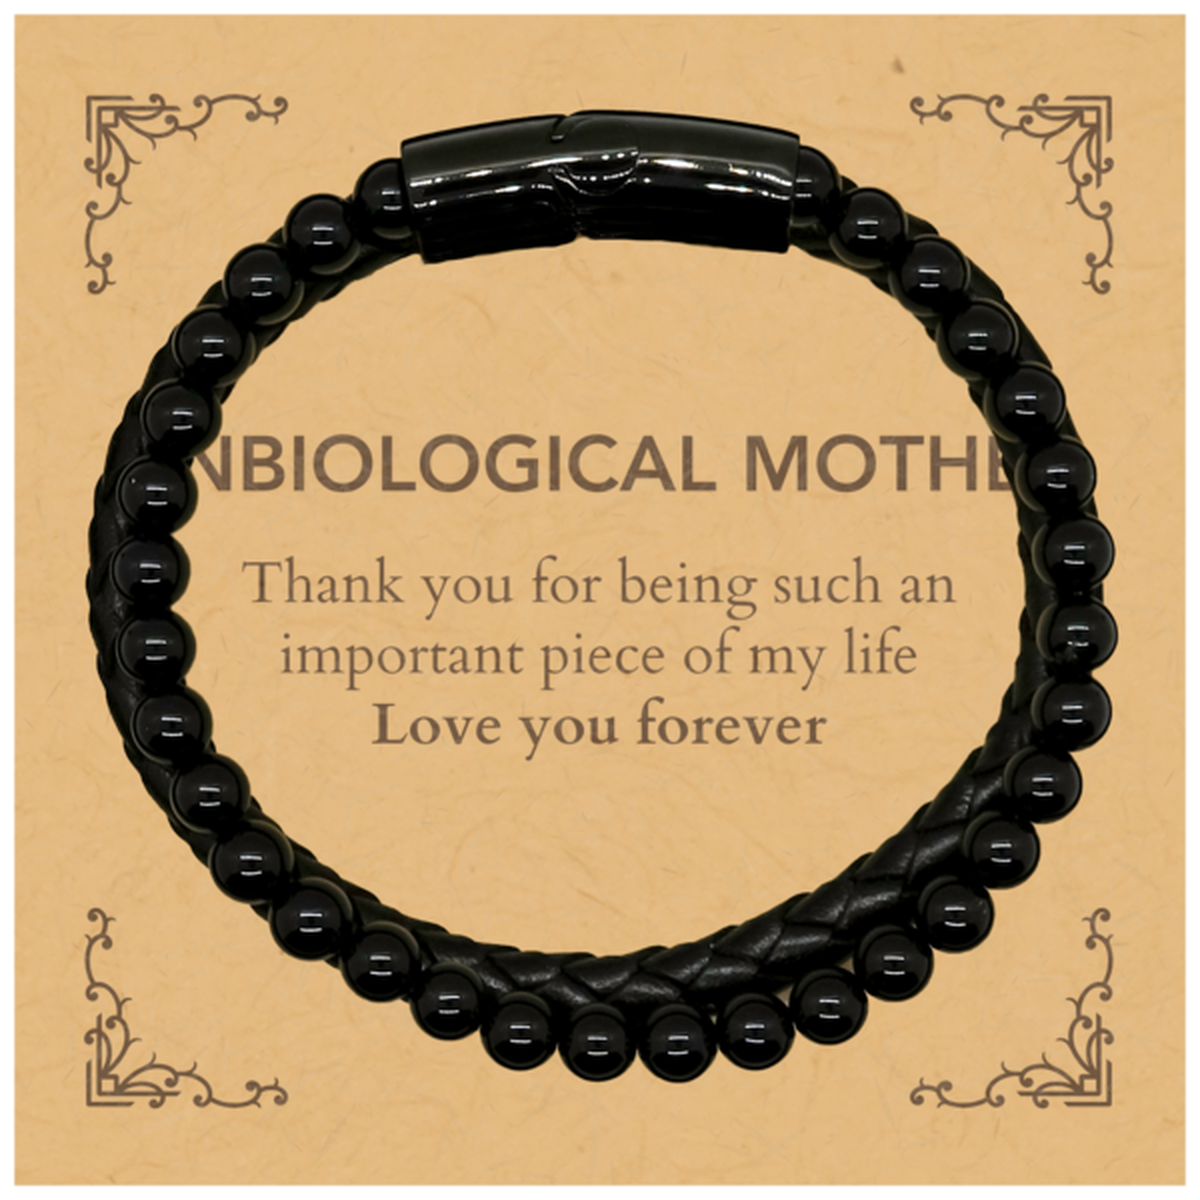 Appropriate Unbiological Mother Stone Leather Bracelets Epic Birthday Gifts for Unbiological Mother Thank you for being such an important piece of my life Unbiological Mother Christmas Mothers Fathers Day